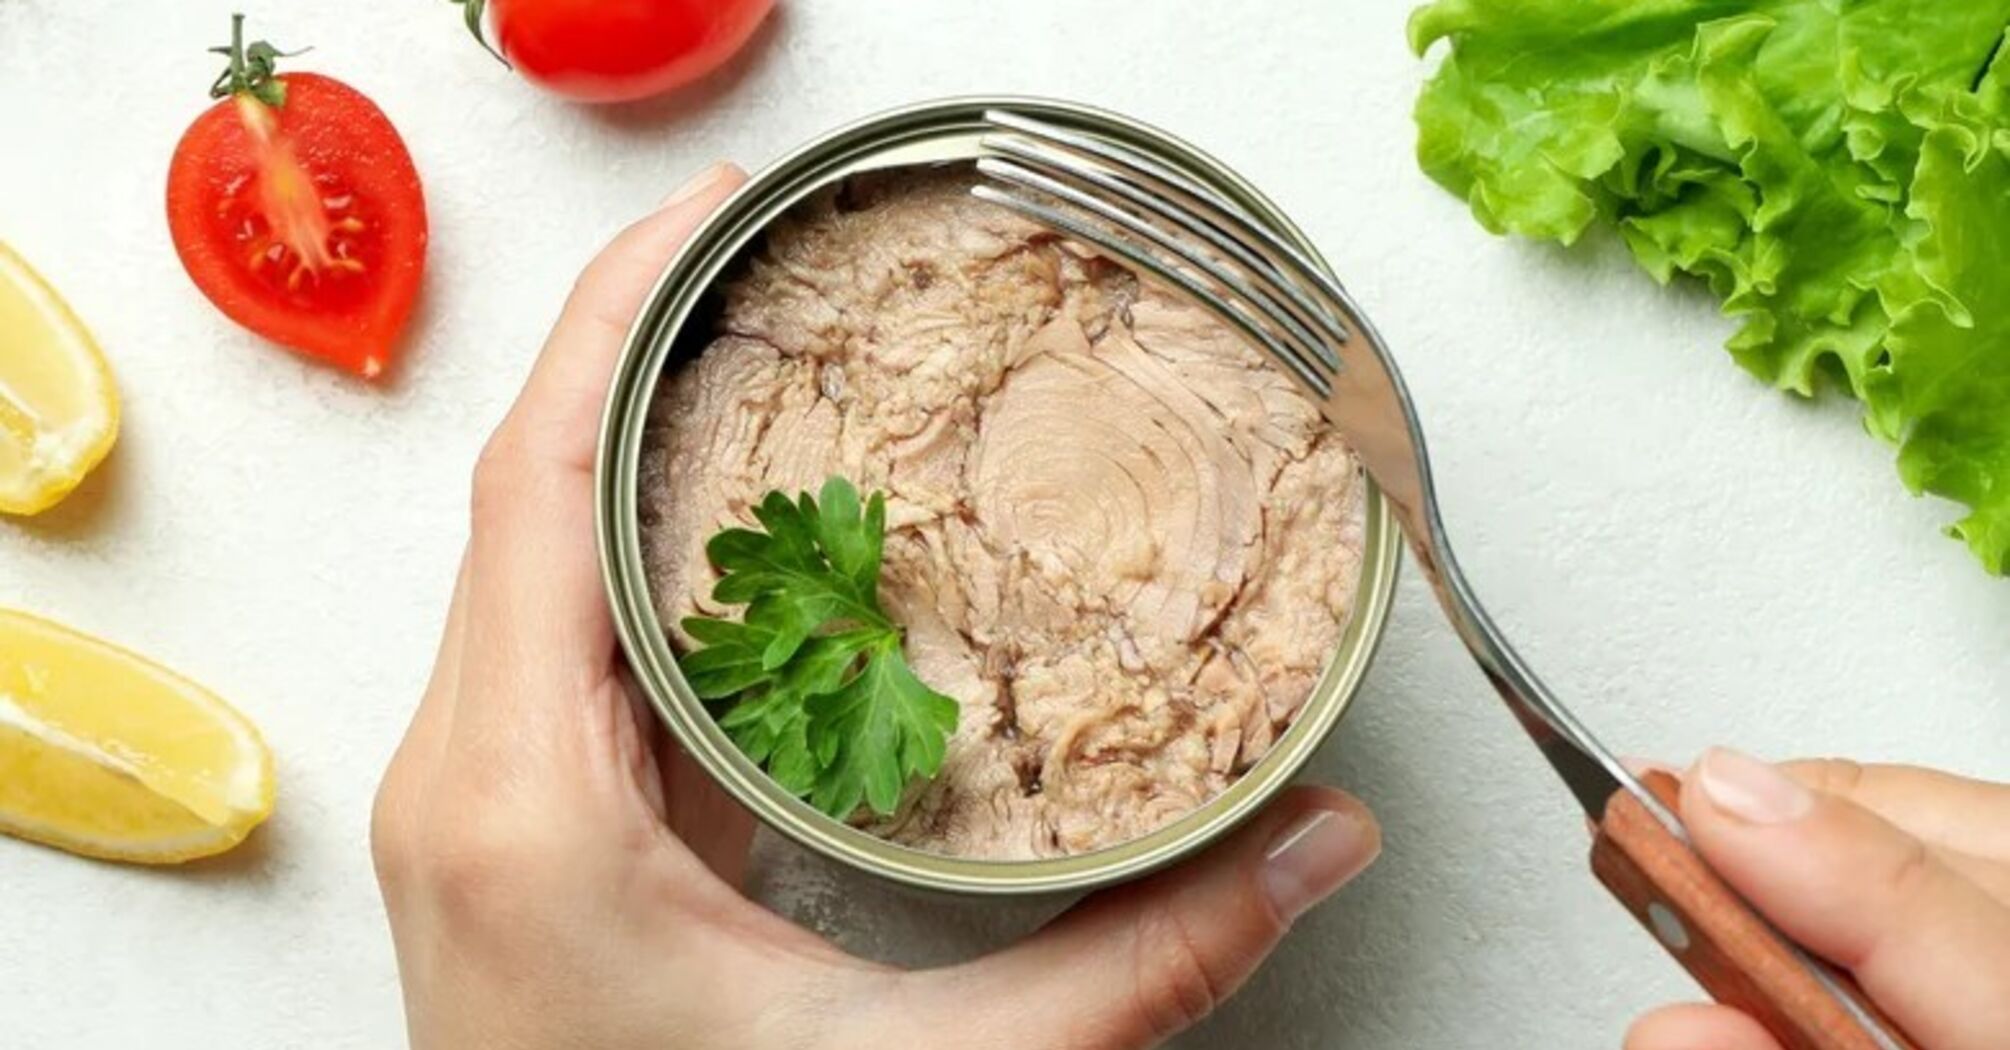  Leftover canned fish oil